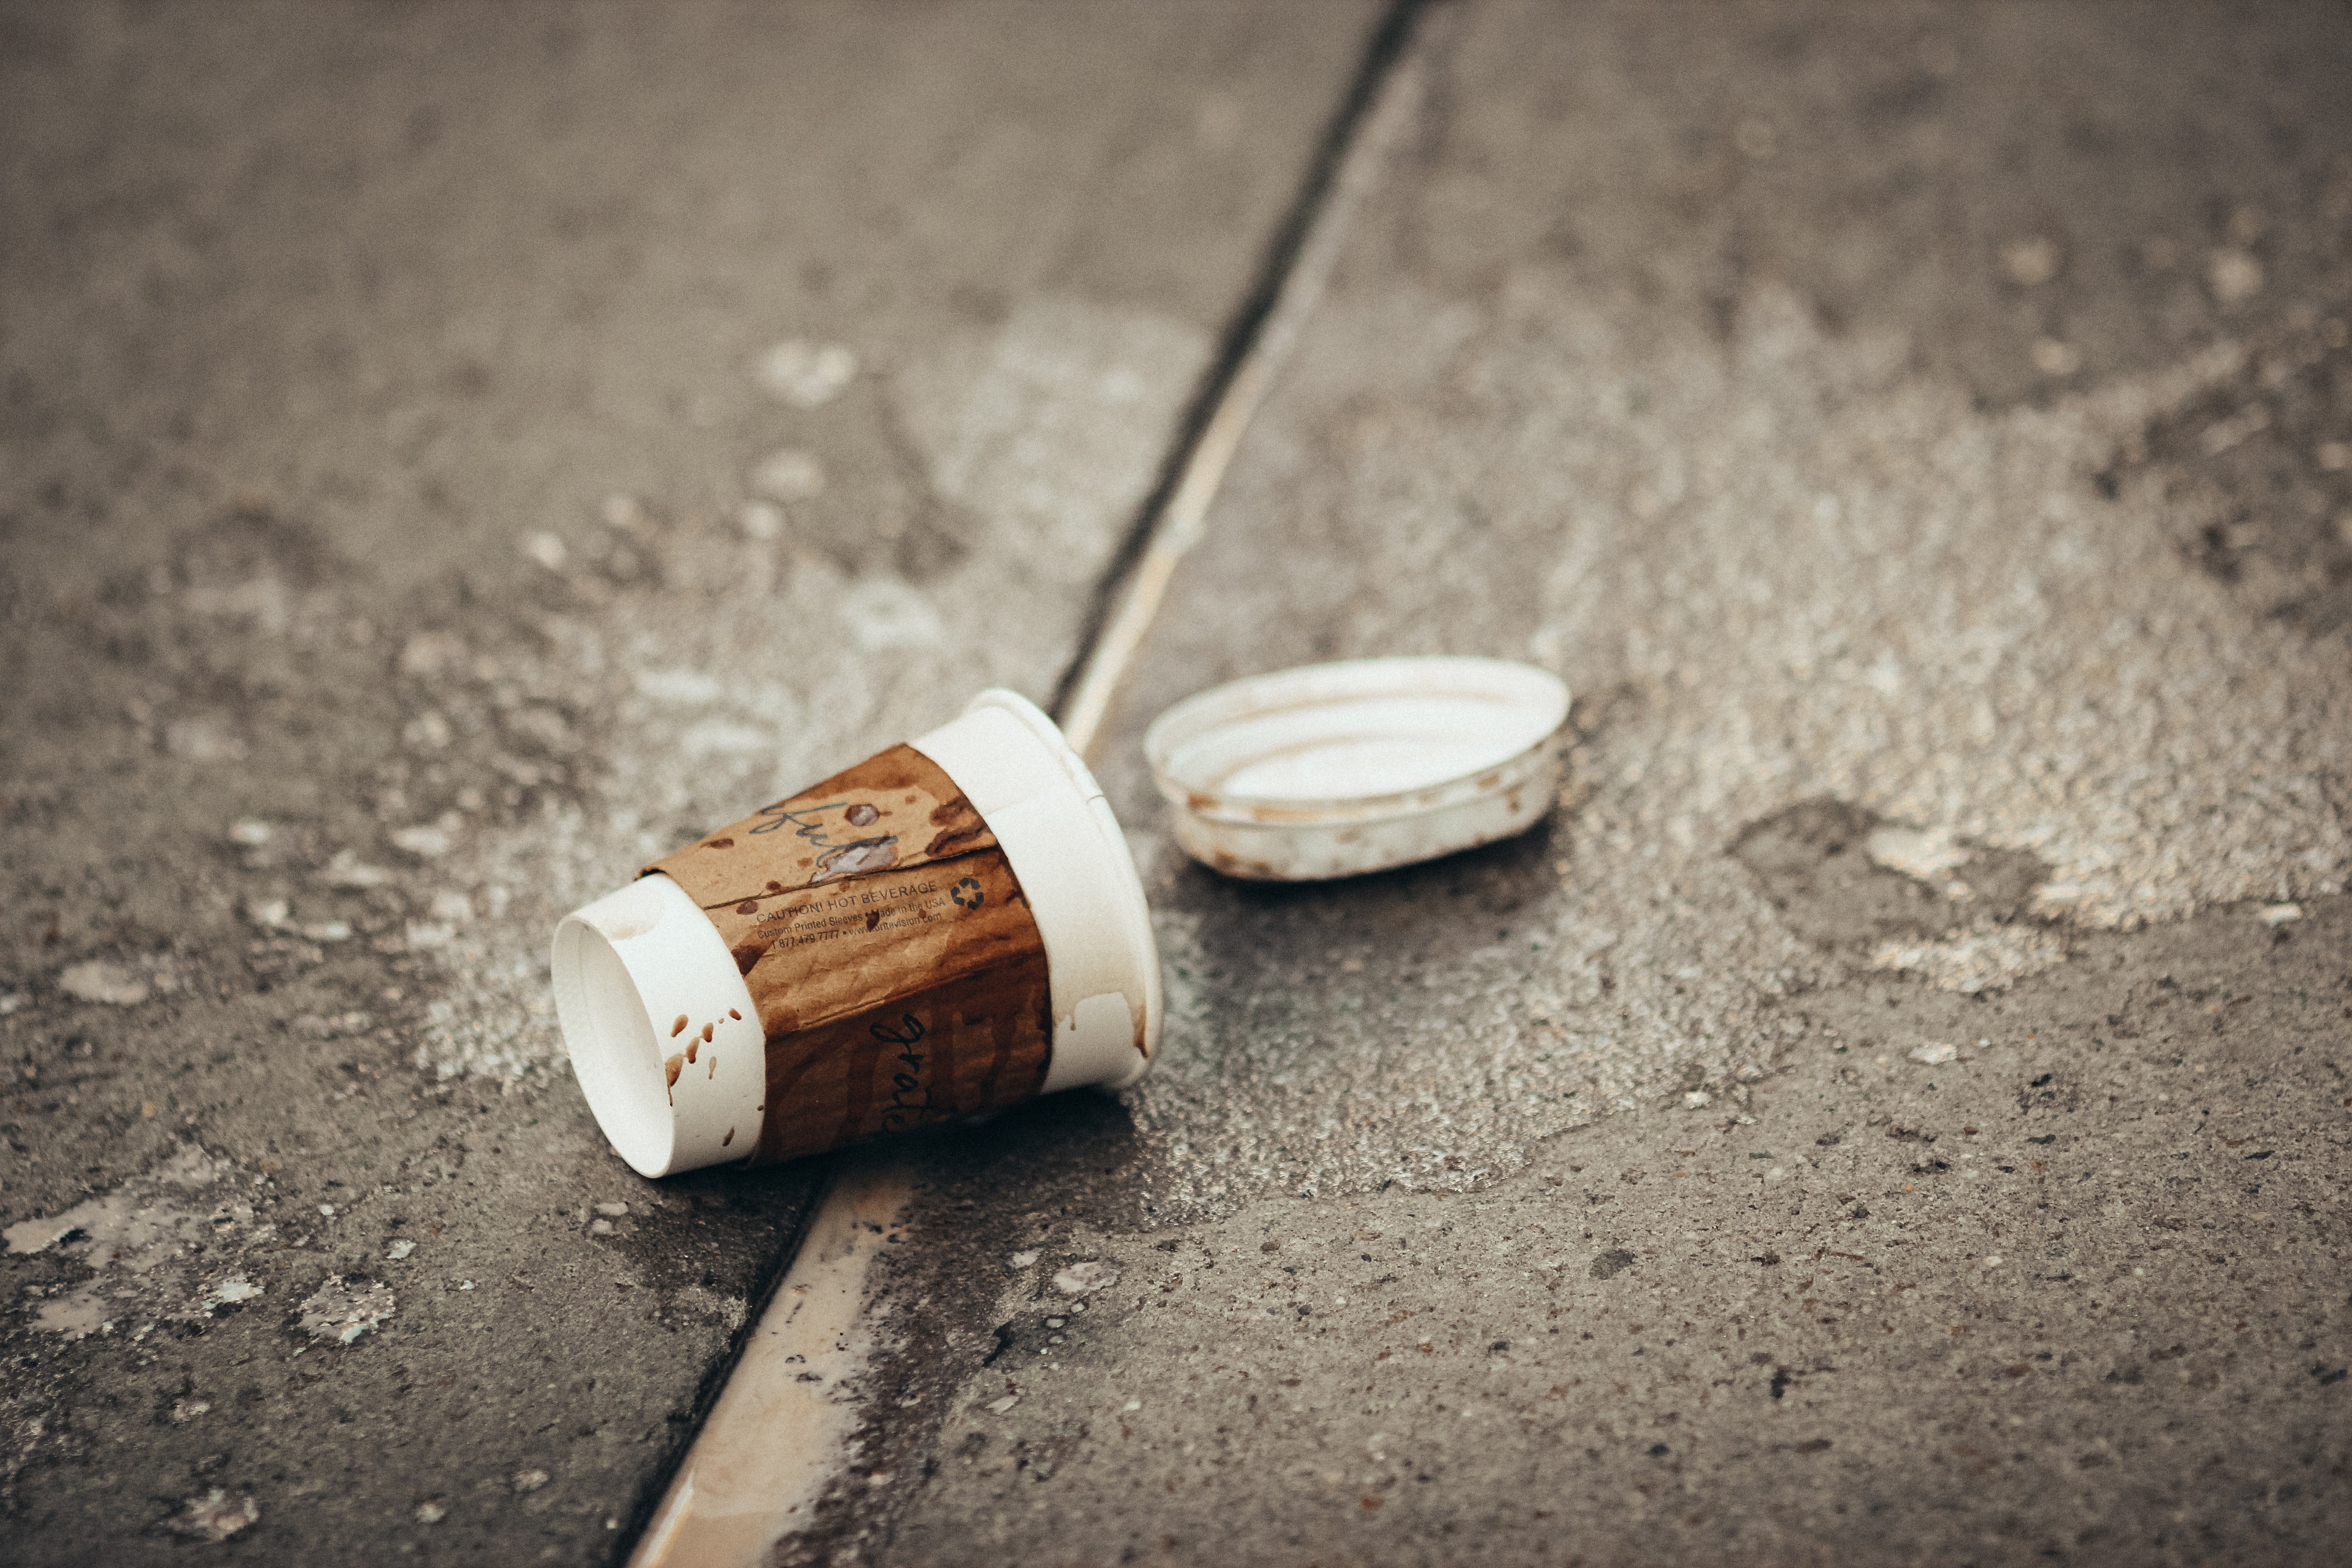 Rita had to clean the mess after an angry employee spat & threw coffee on the floor. | Source: Unsplash